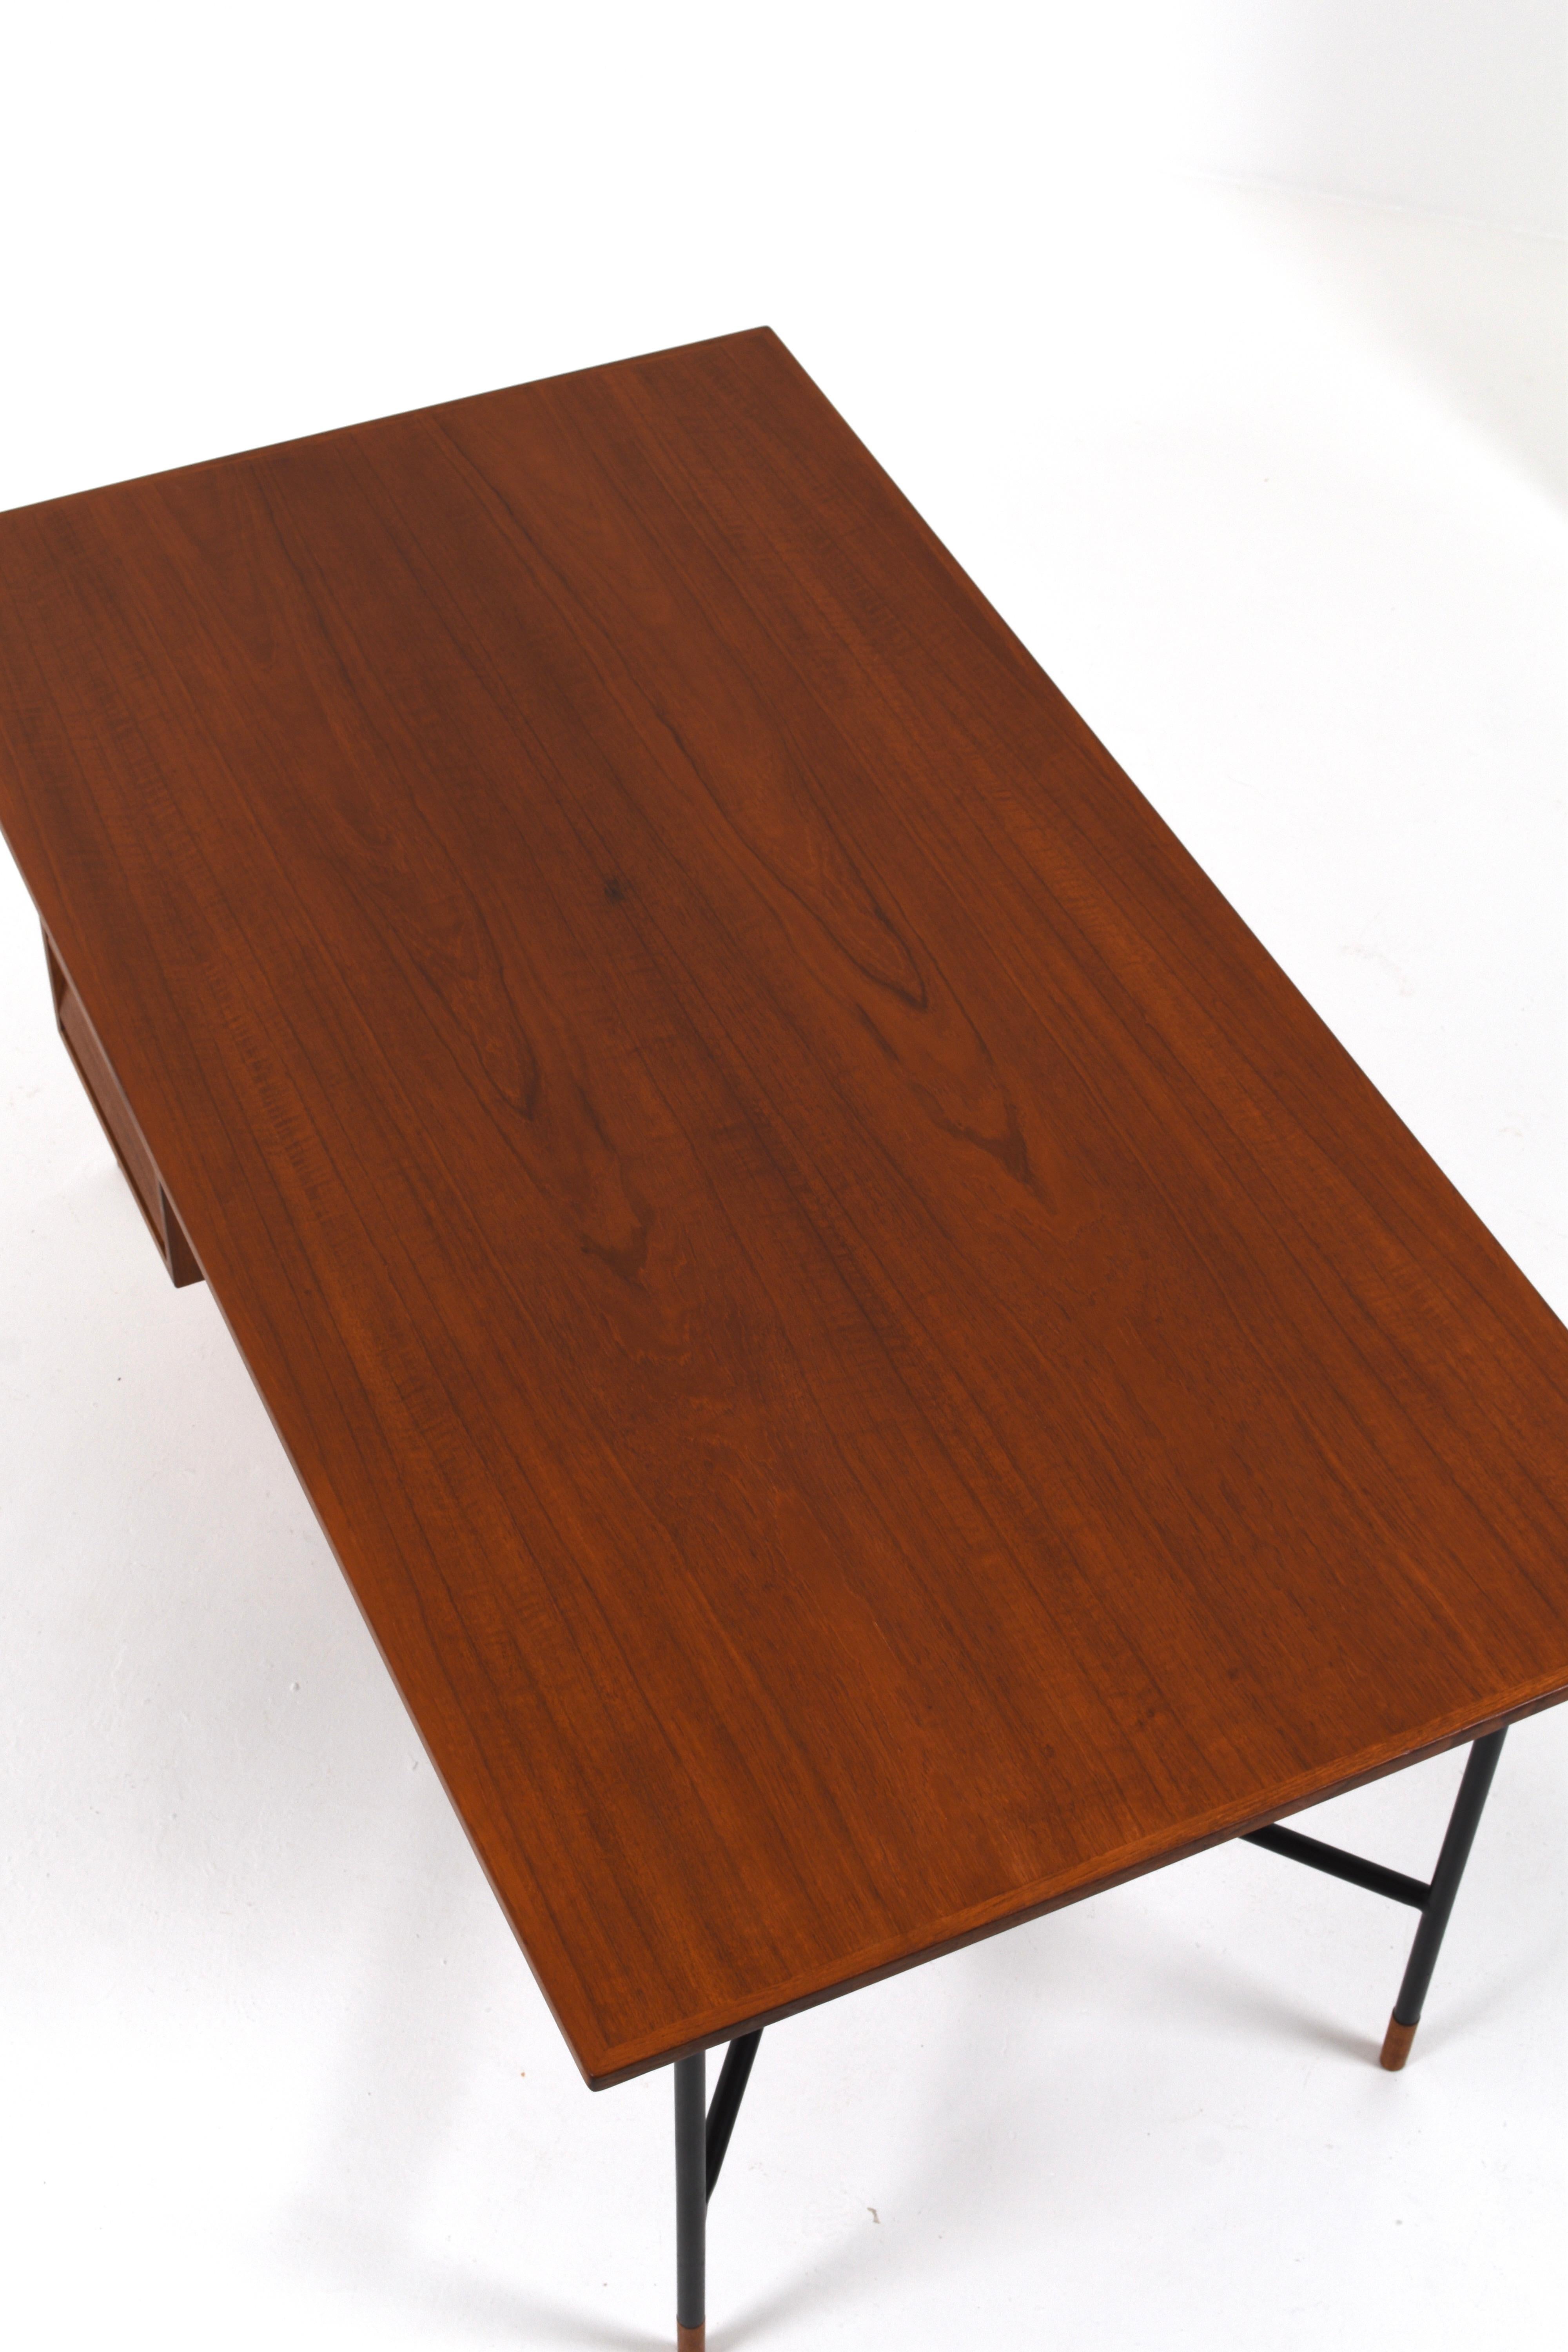 Rare Desk H-55 by Åke Hassbjer in teak and steel base, 1950s For Sale 1